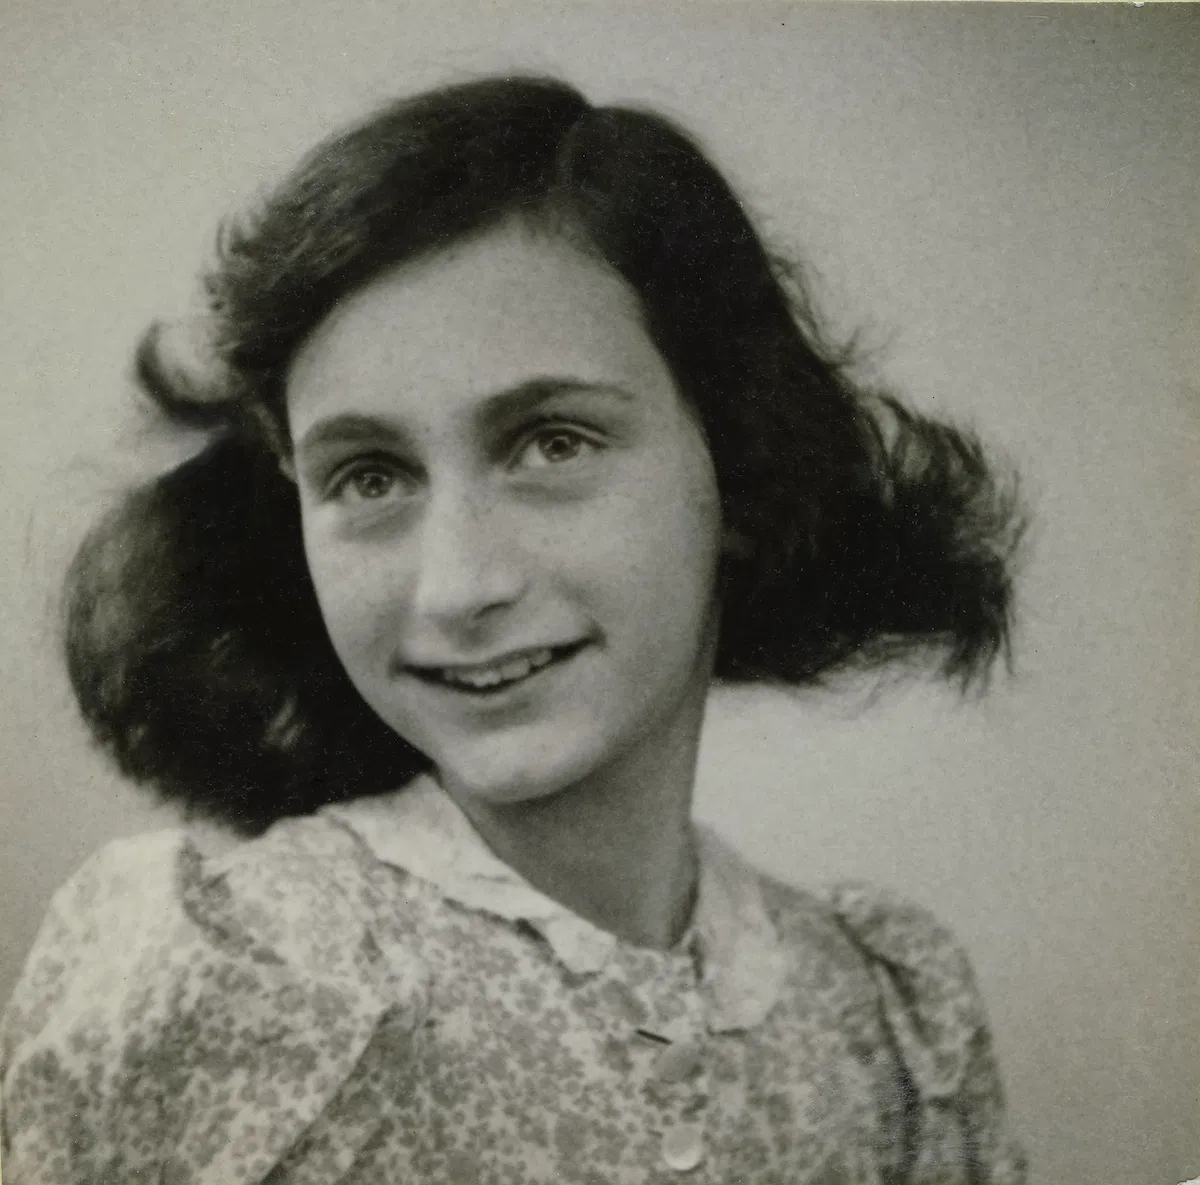 Today is Anne Franks's birthday In Uganda, Afghanistan & Somalia, LGBTs are being hunted like Anne was They hide in rooms like she did - fearing arrest, torture & execution In the name of #AnneFrank NEVER AGAIN! @benjamincohen @benjaminbutter @BenWeinthal @sanditoksvig